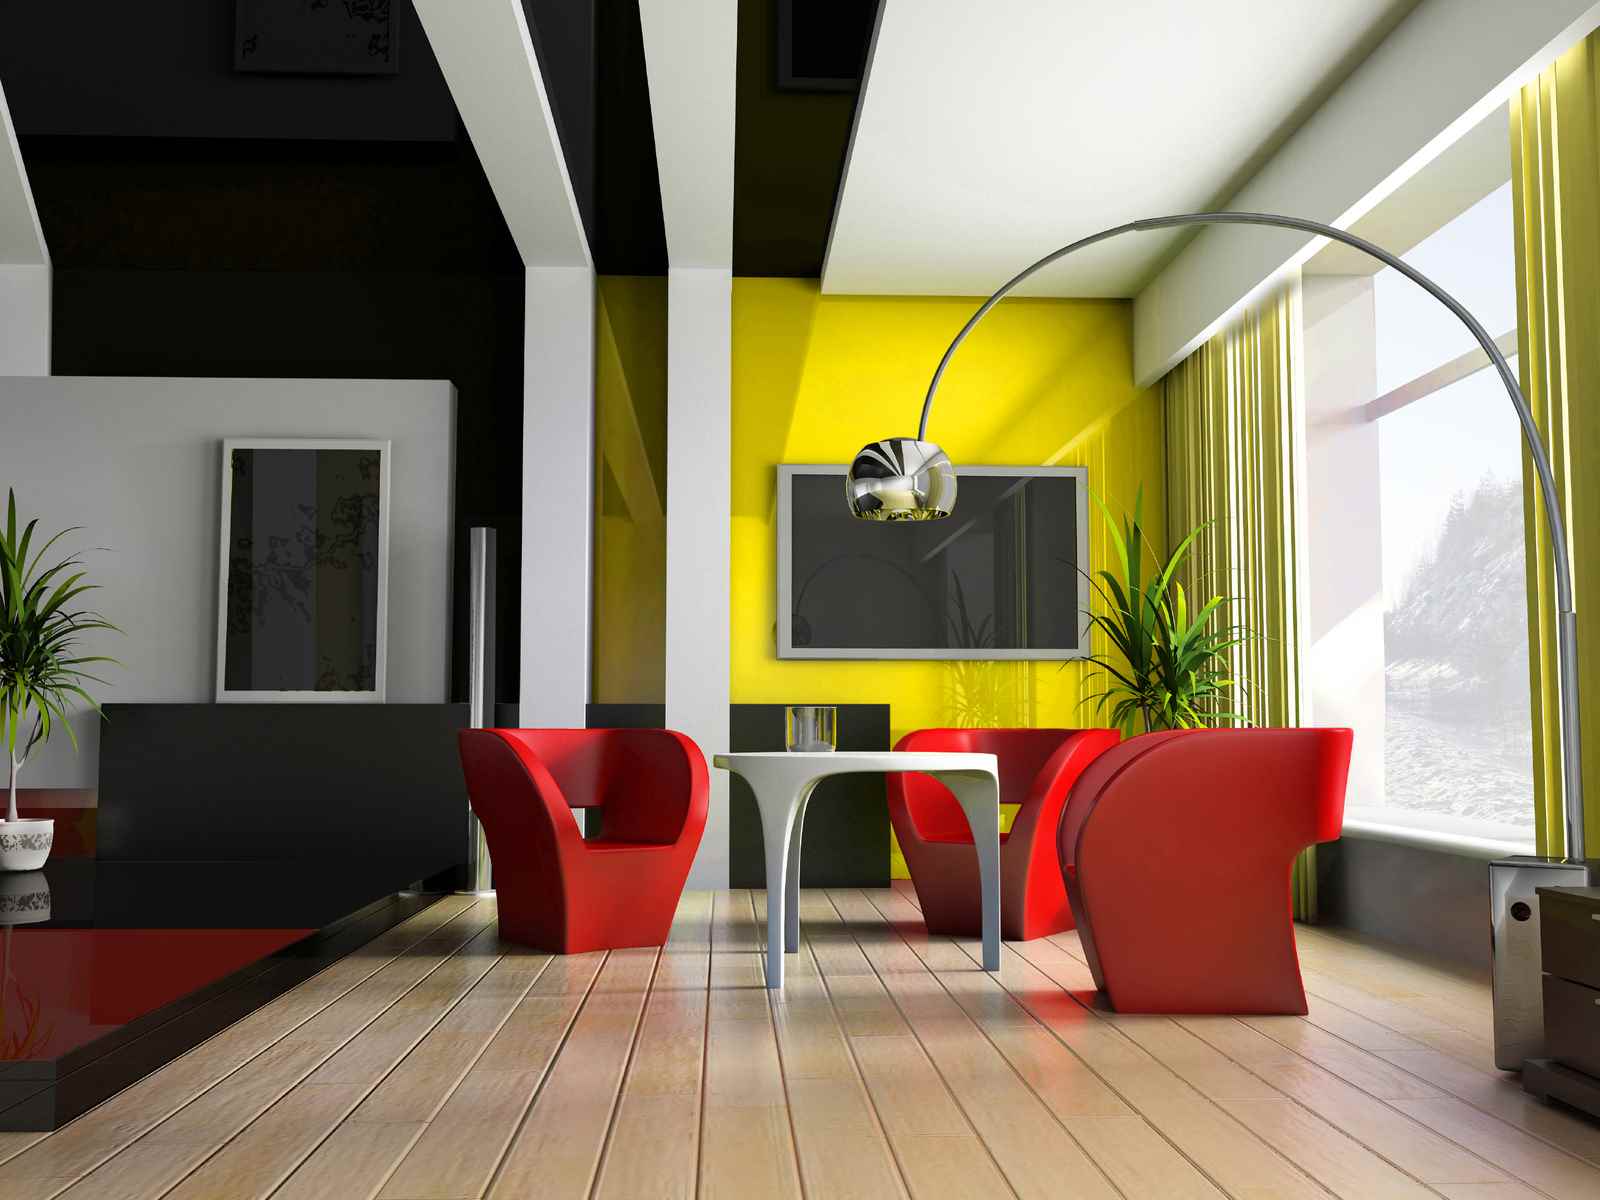 the idea of ​​using an unusual yellow color in the interior of the apartment